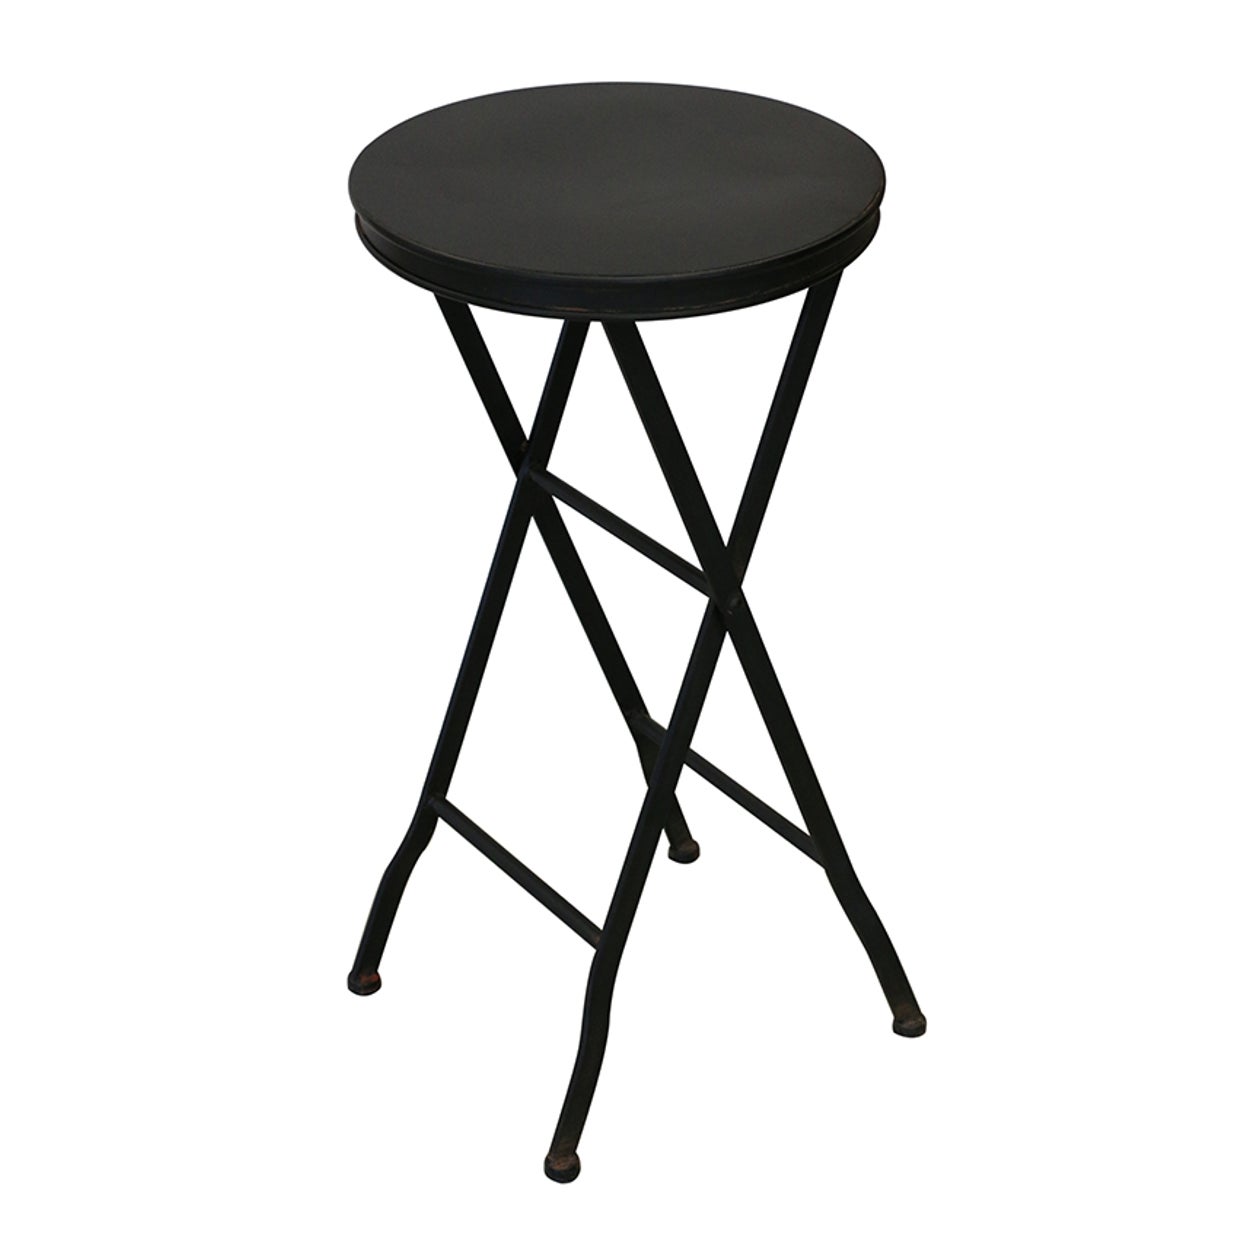 Parisian Style Occasional Table Black Metal